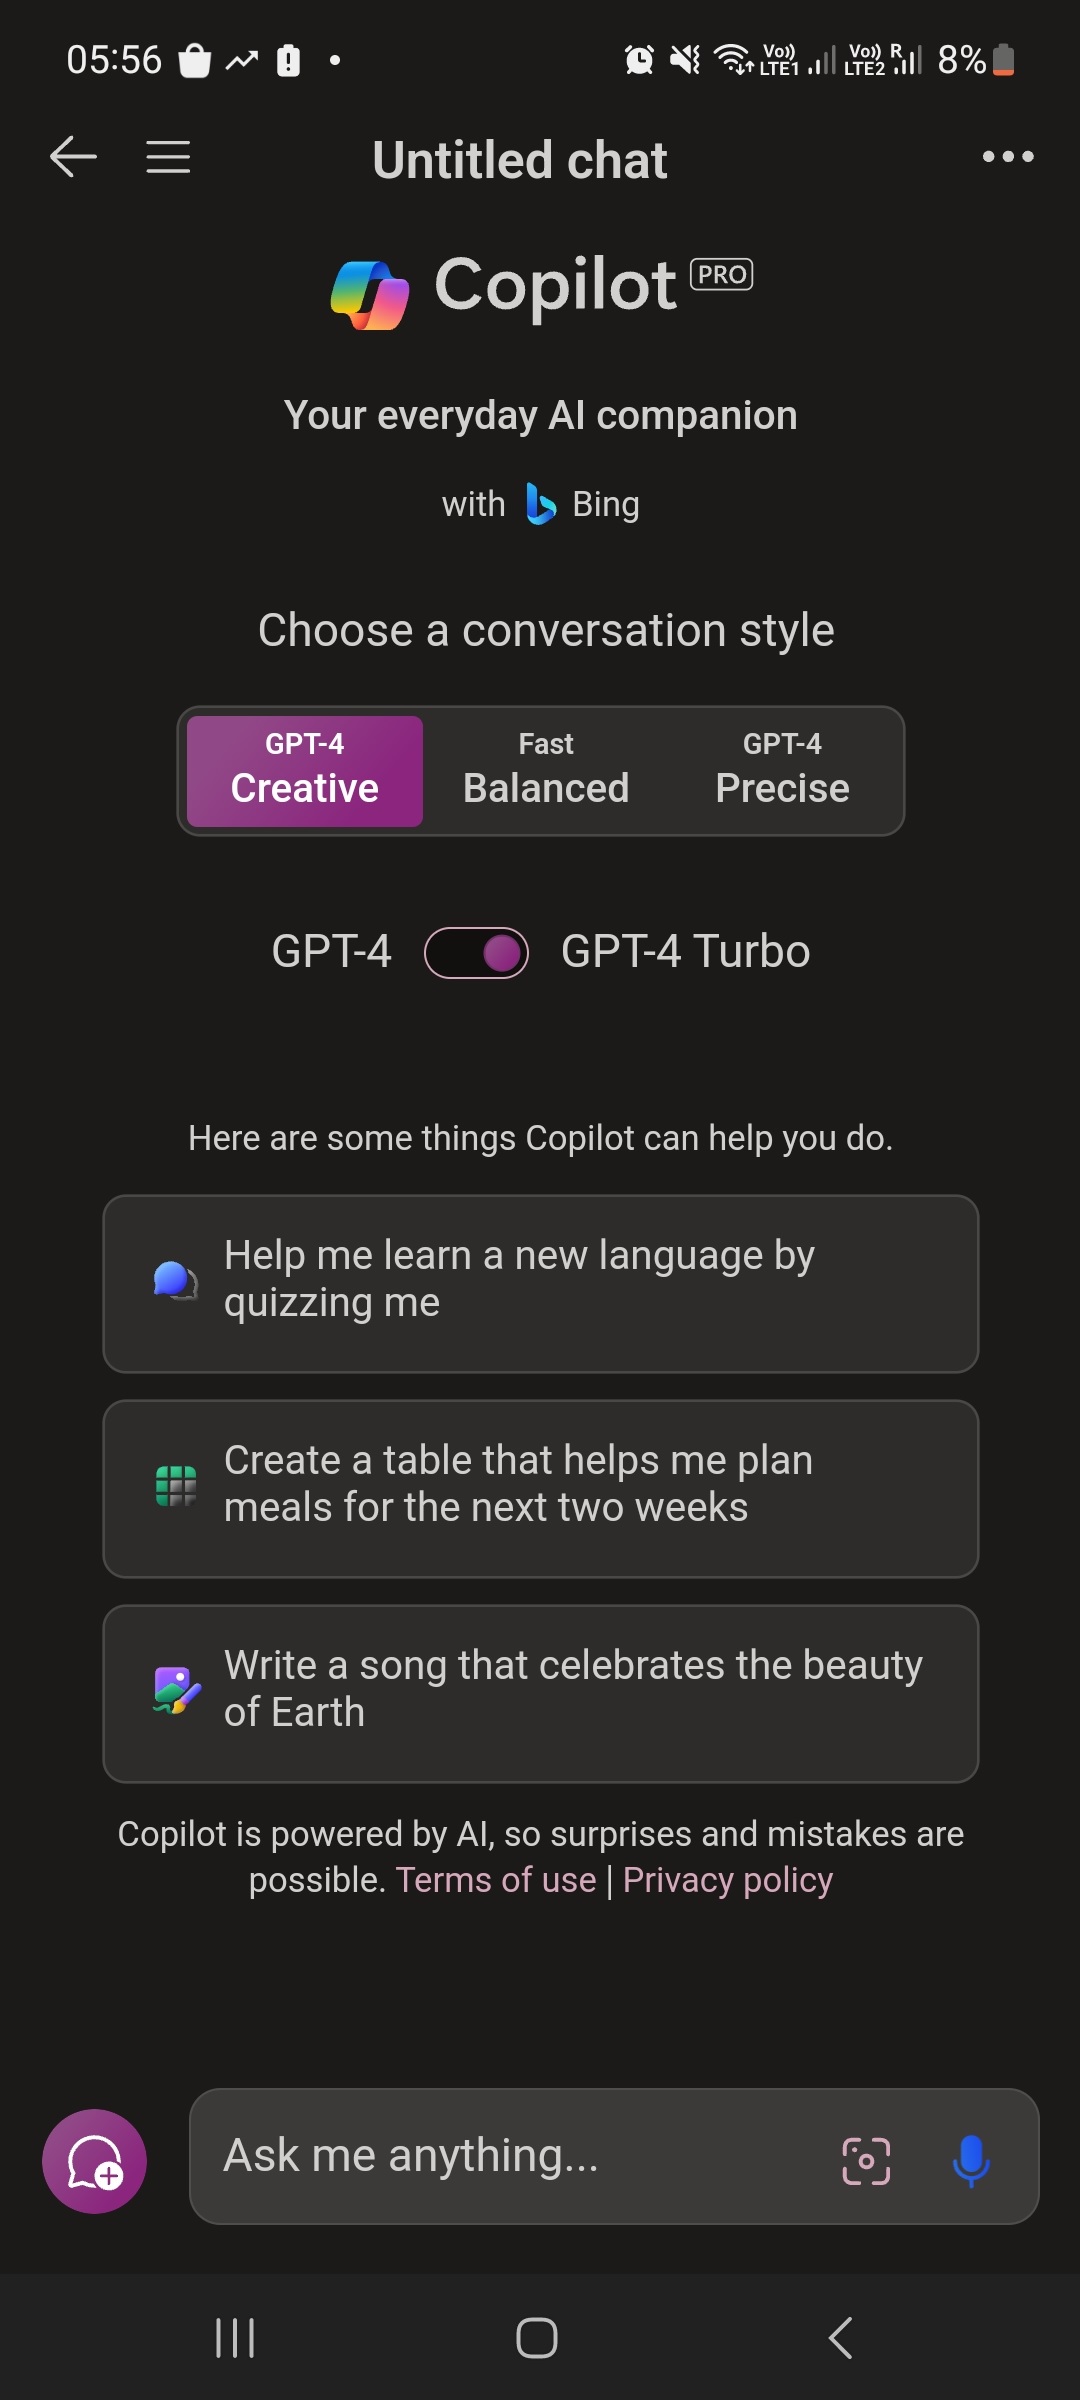 Copilot Pro for Android